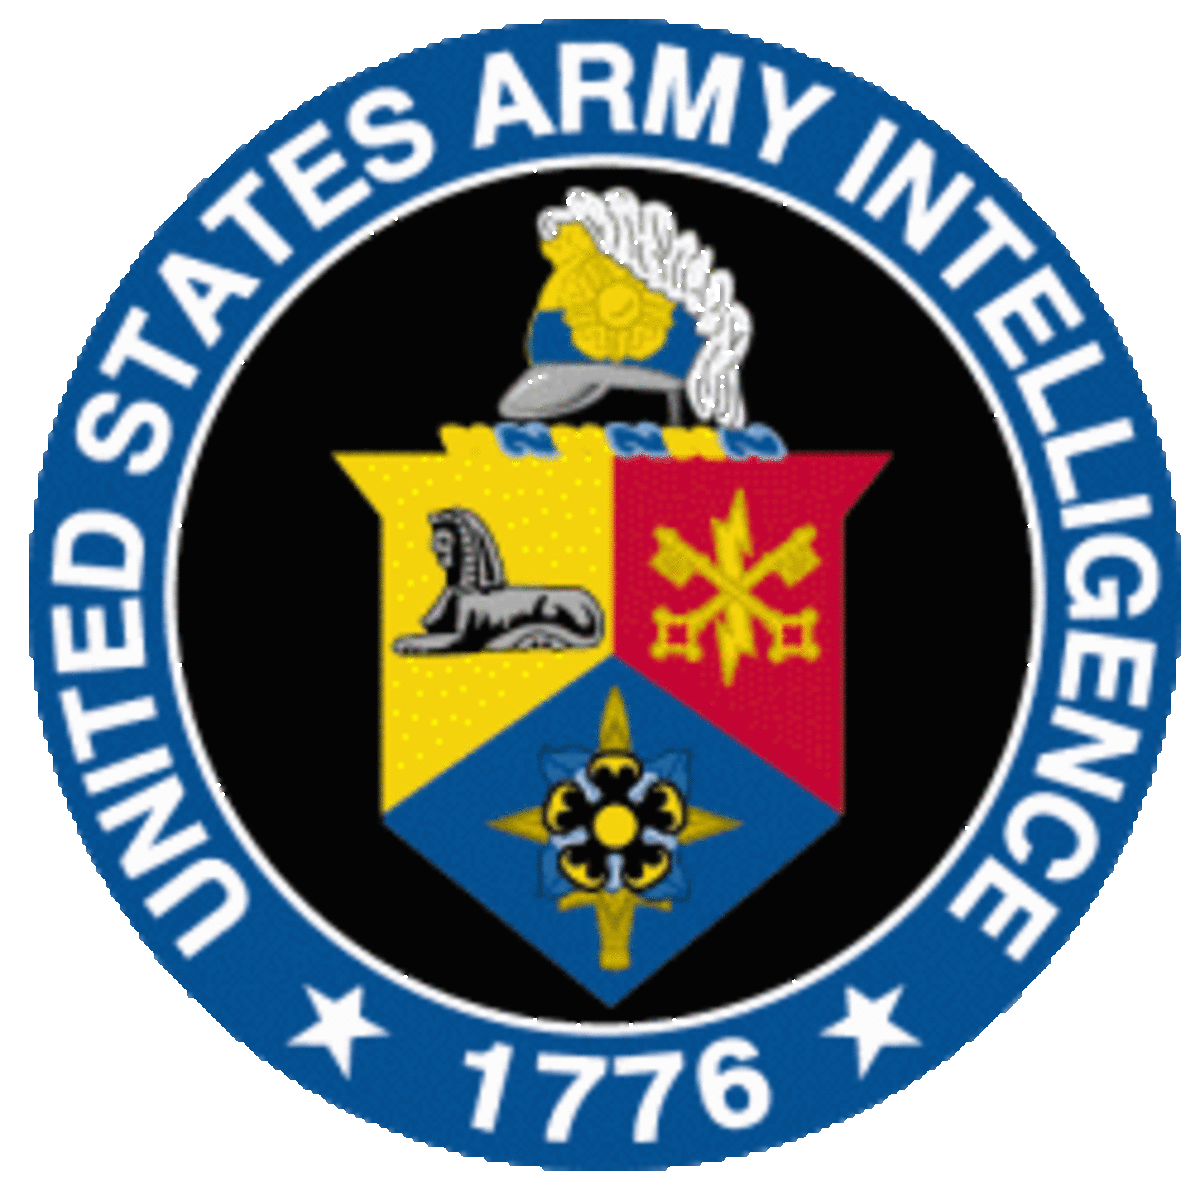  Office of the Deputy Chief of Staff for Intelligence, United States Army Intelligence, G-2 Seal http://www.dami.army.pentagon.mil/offices/CI.aspx